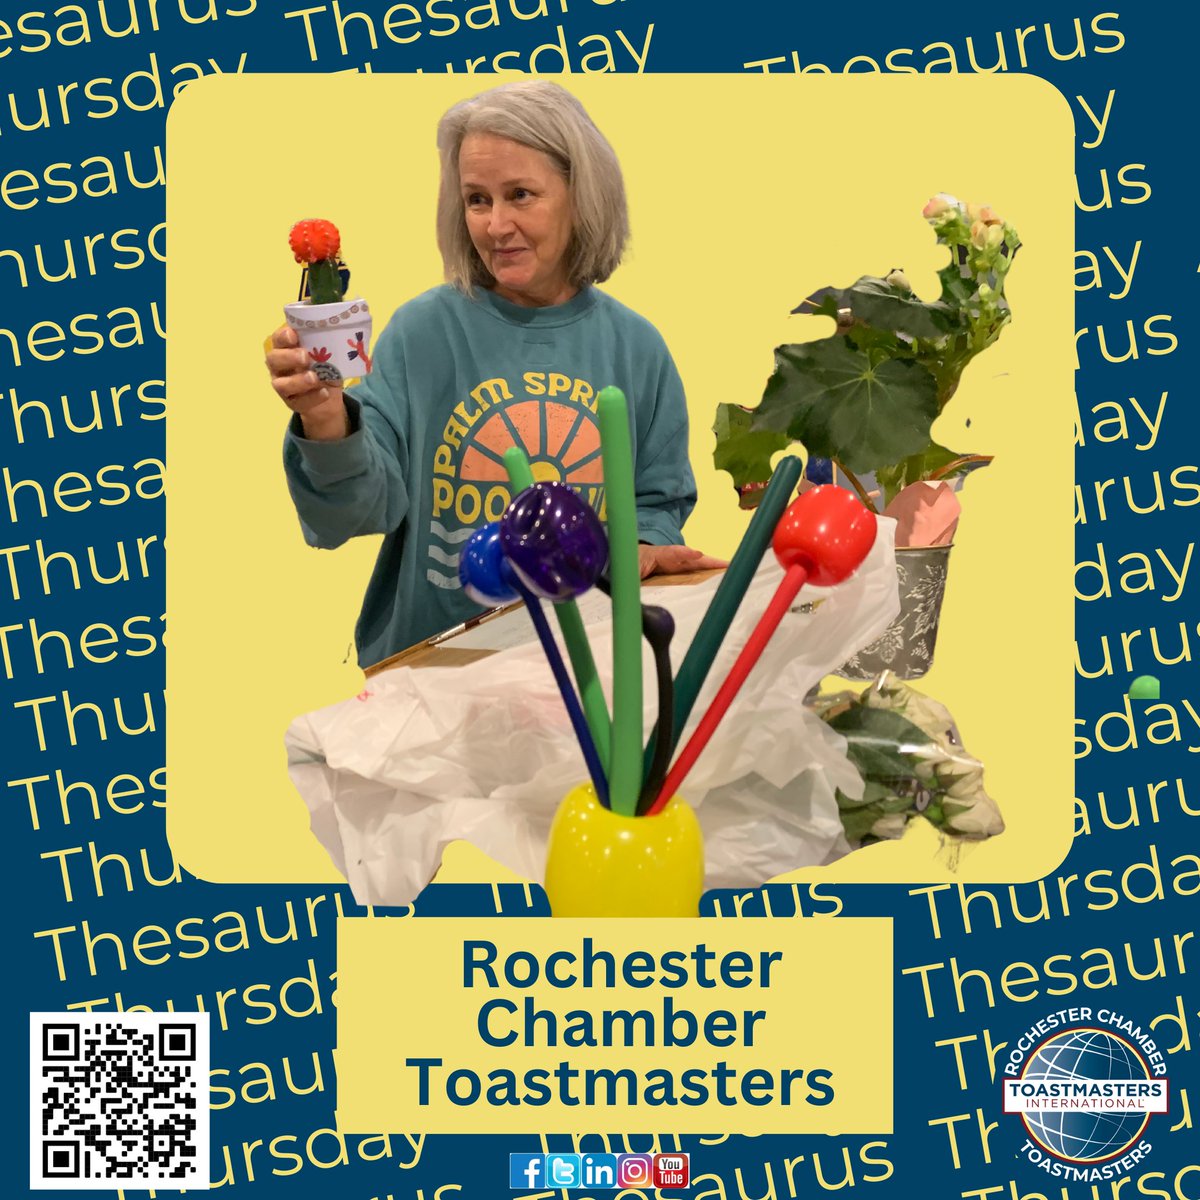 Thesaurus Thursday - In the spirit of May, Kristi’s got a floral “Flourish” today! (def) To be successful; thrive in growth; to make dramatic gestures #toastmasters #rochmn  #mn #rochester_mn  #minnesotas_rochester #publicspeaking  #neighborshare #neighborstory #wordofday